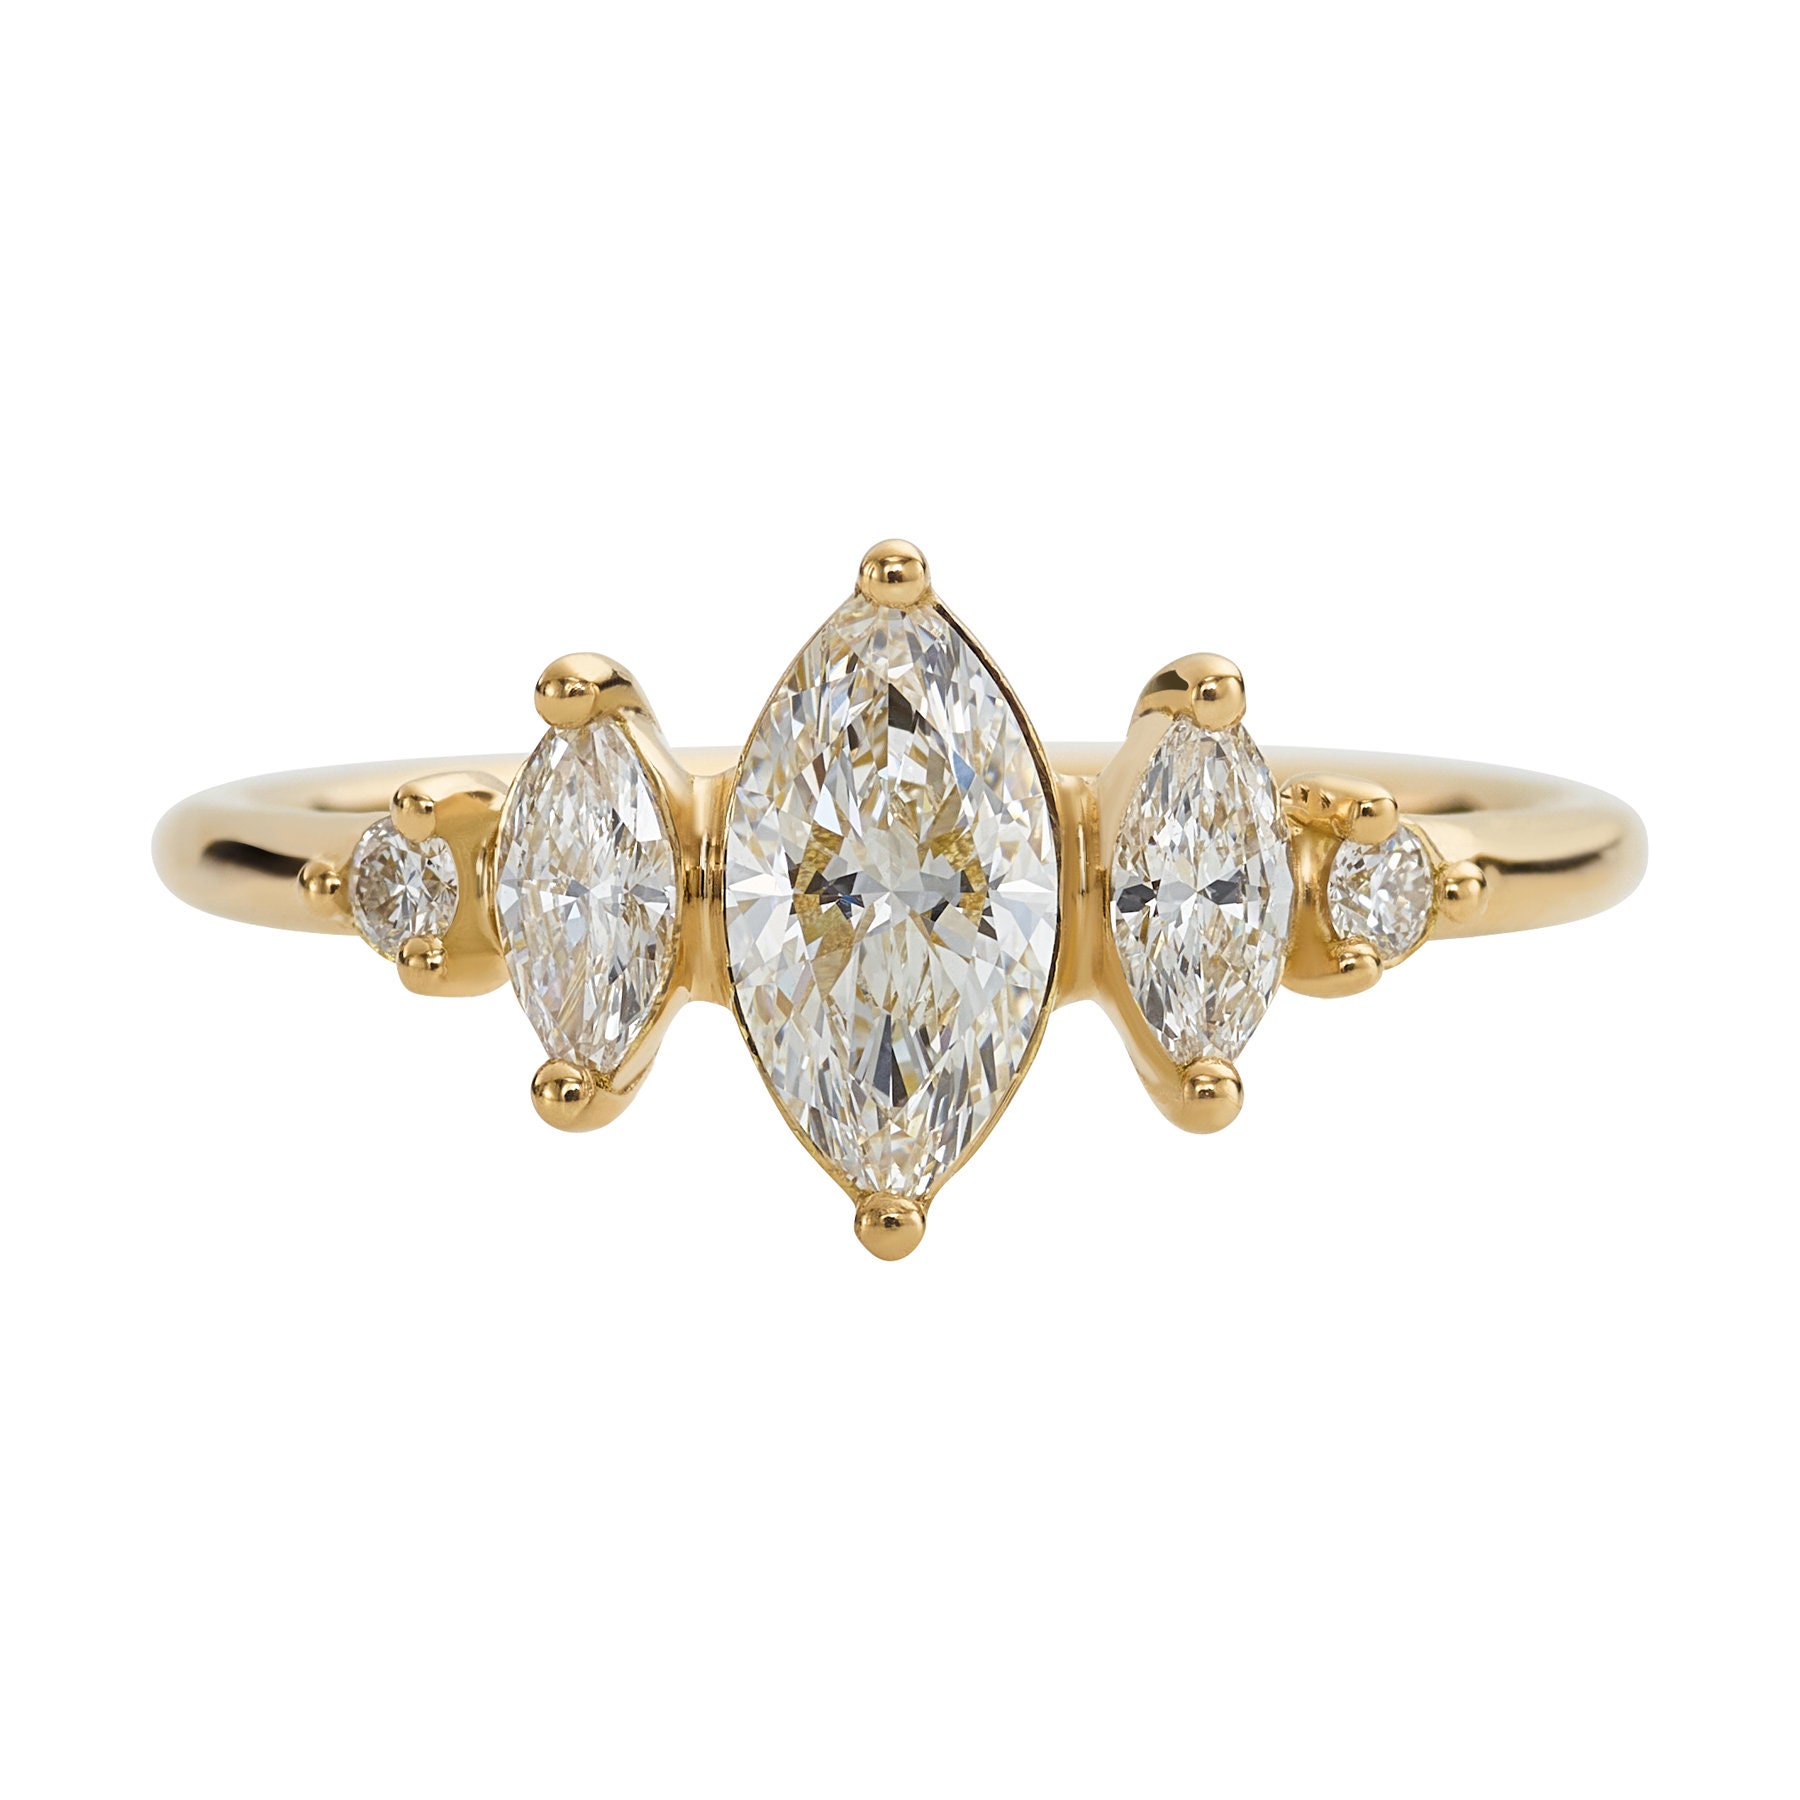 Floating Pear Cut Diamond Engagement Ring in A Classic Style